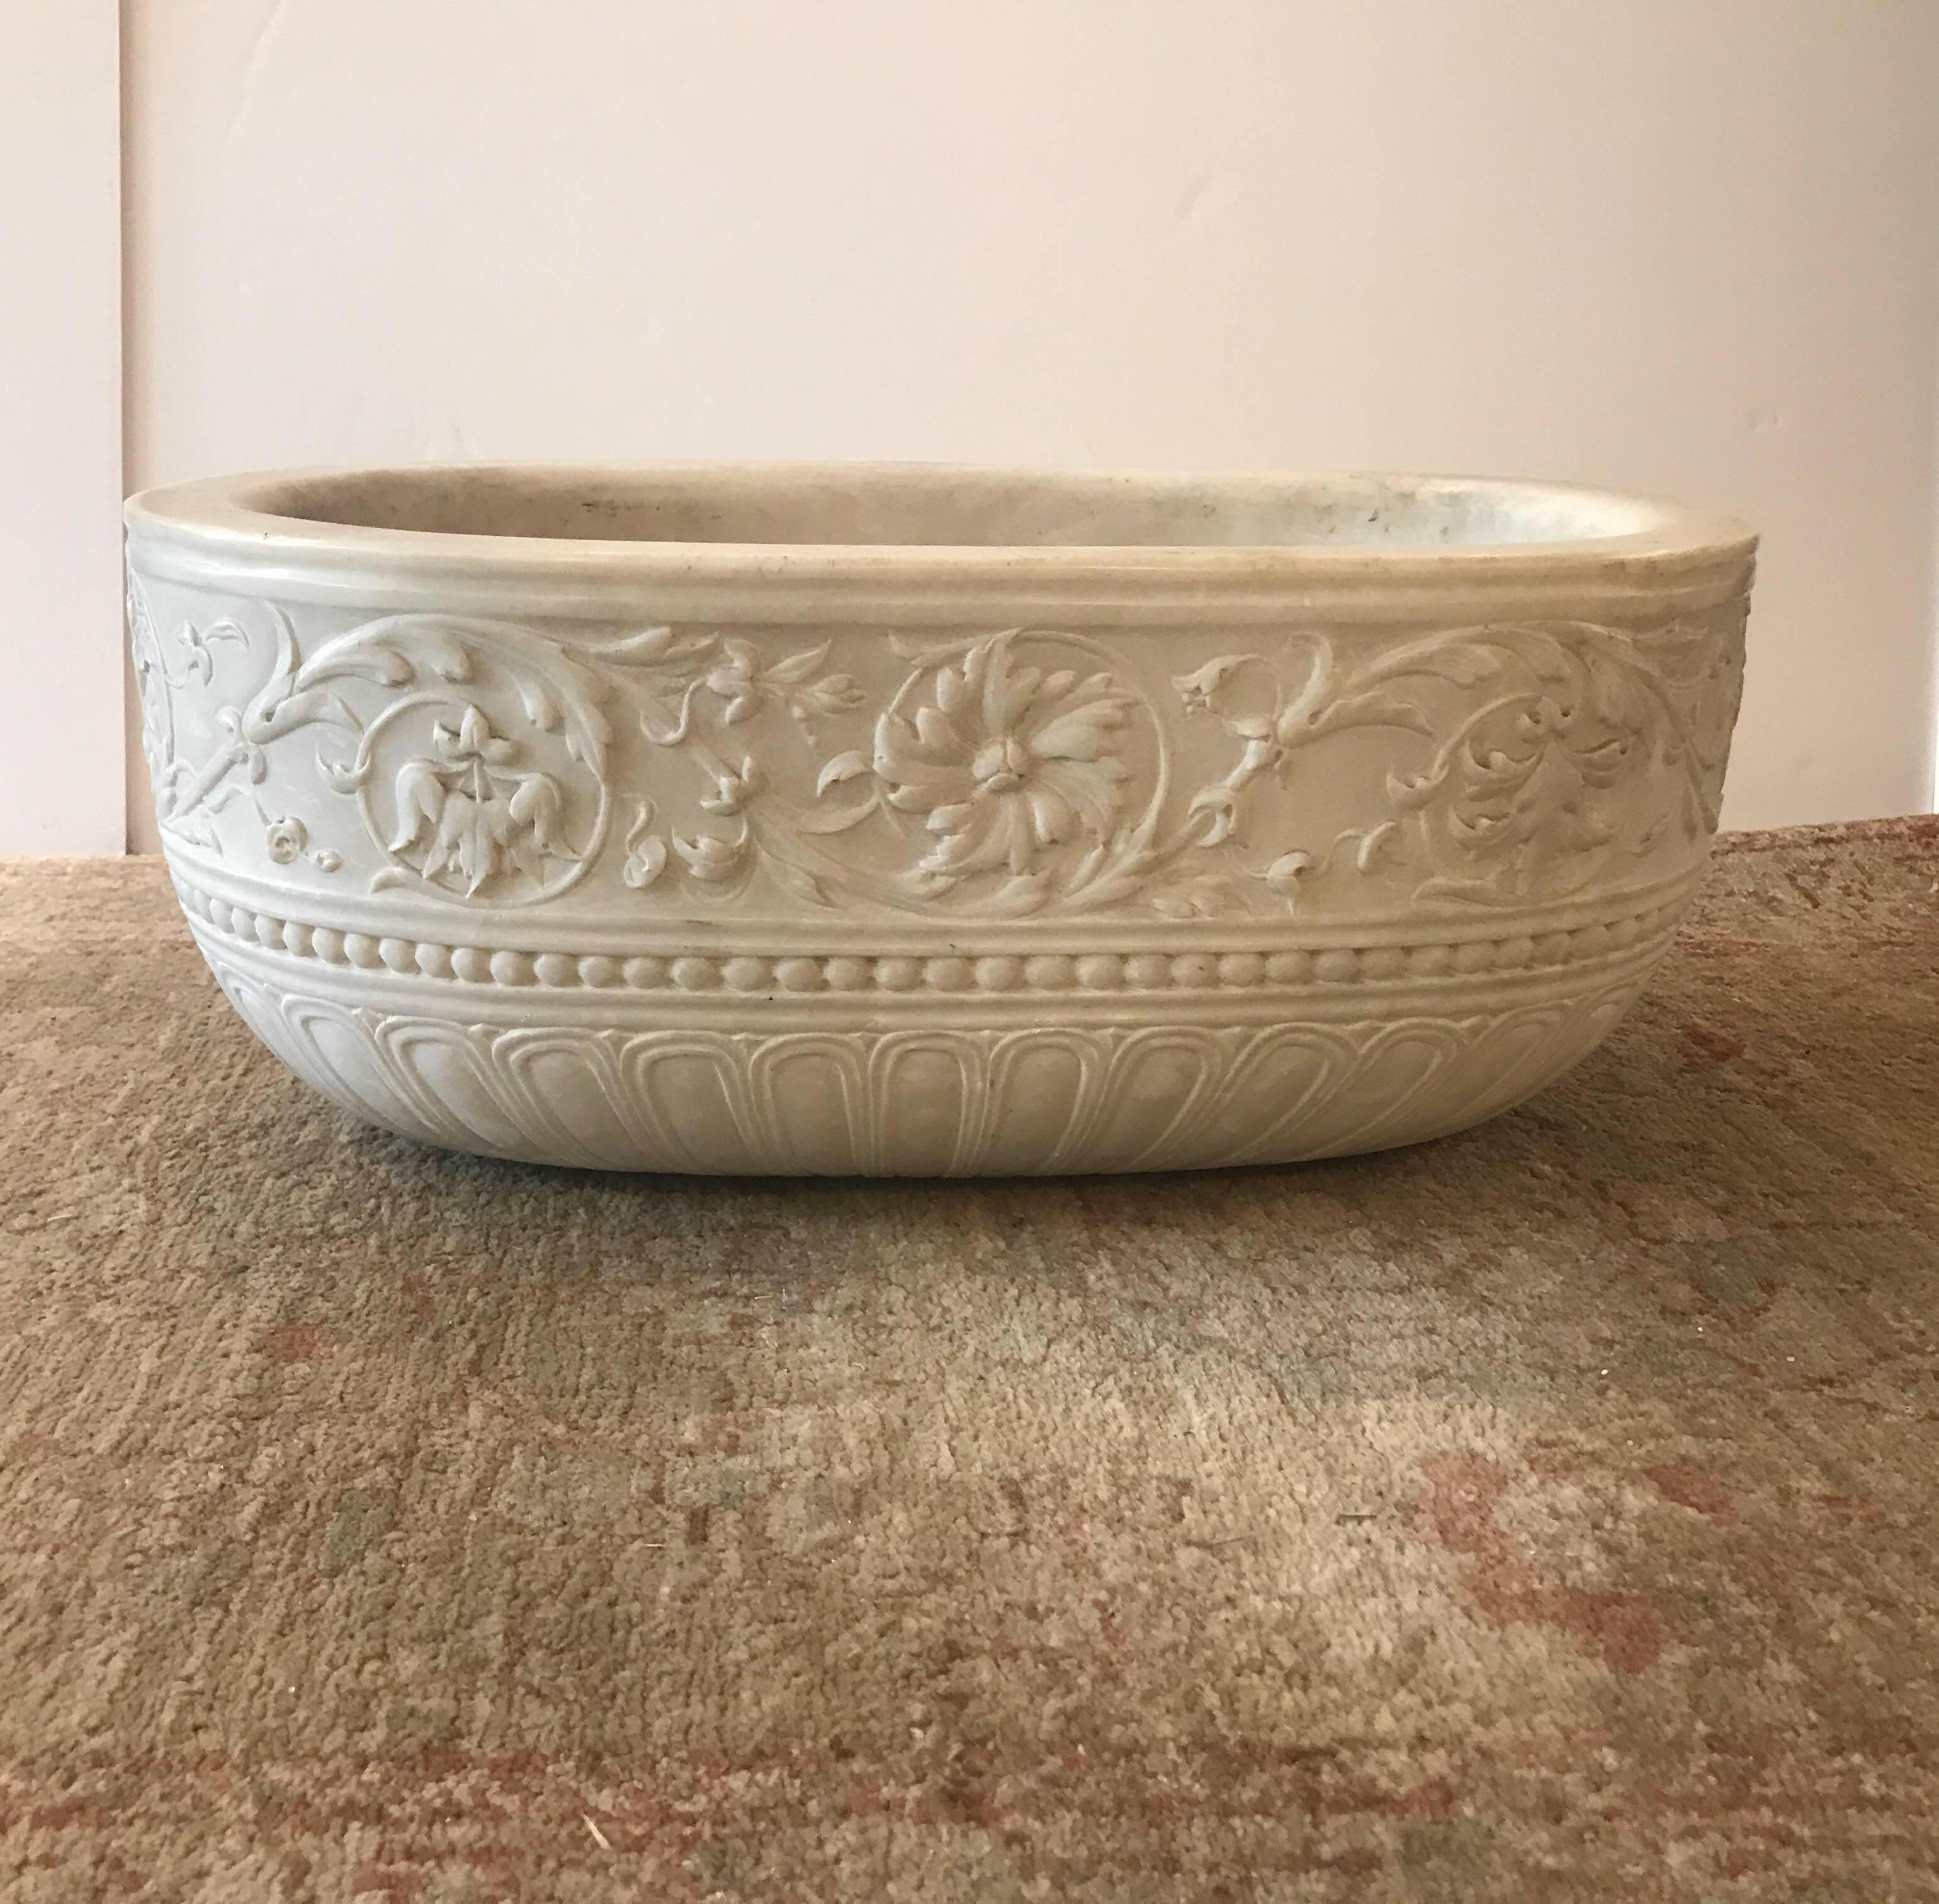 Unique one of a kind hand-carved marble basin, sink, fountain. This oval basin is carved in a Venetian style on the outside with beading borders and scrolling foliate pattern. The interior is drilled with a drain hole for a sink or a line to